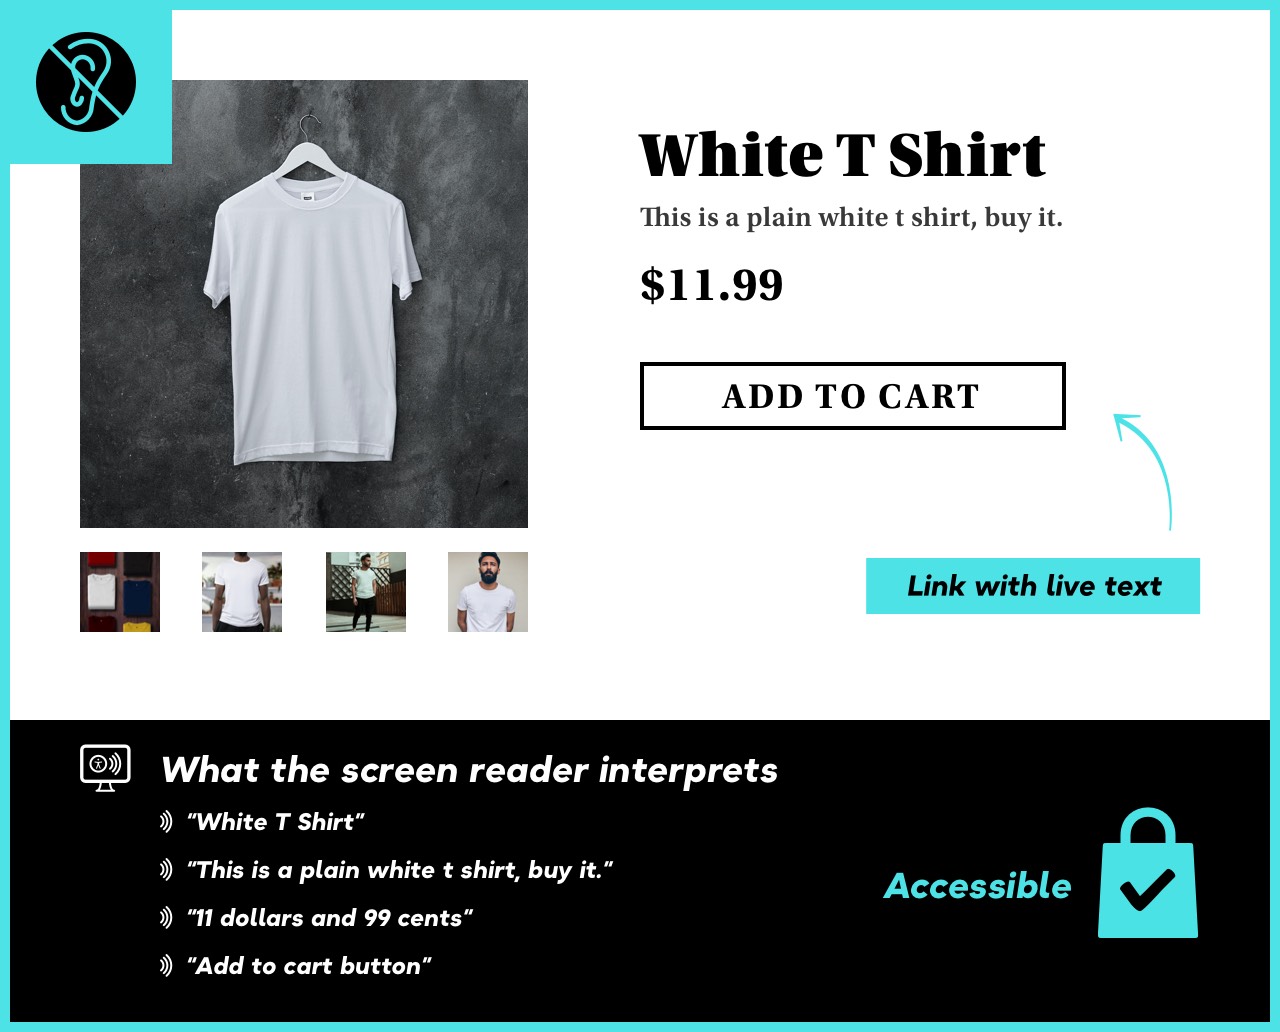 Example of an accessible online shopping experience